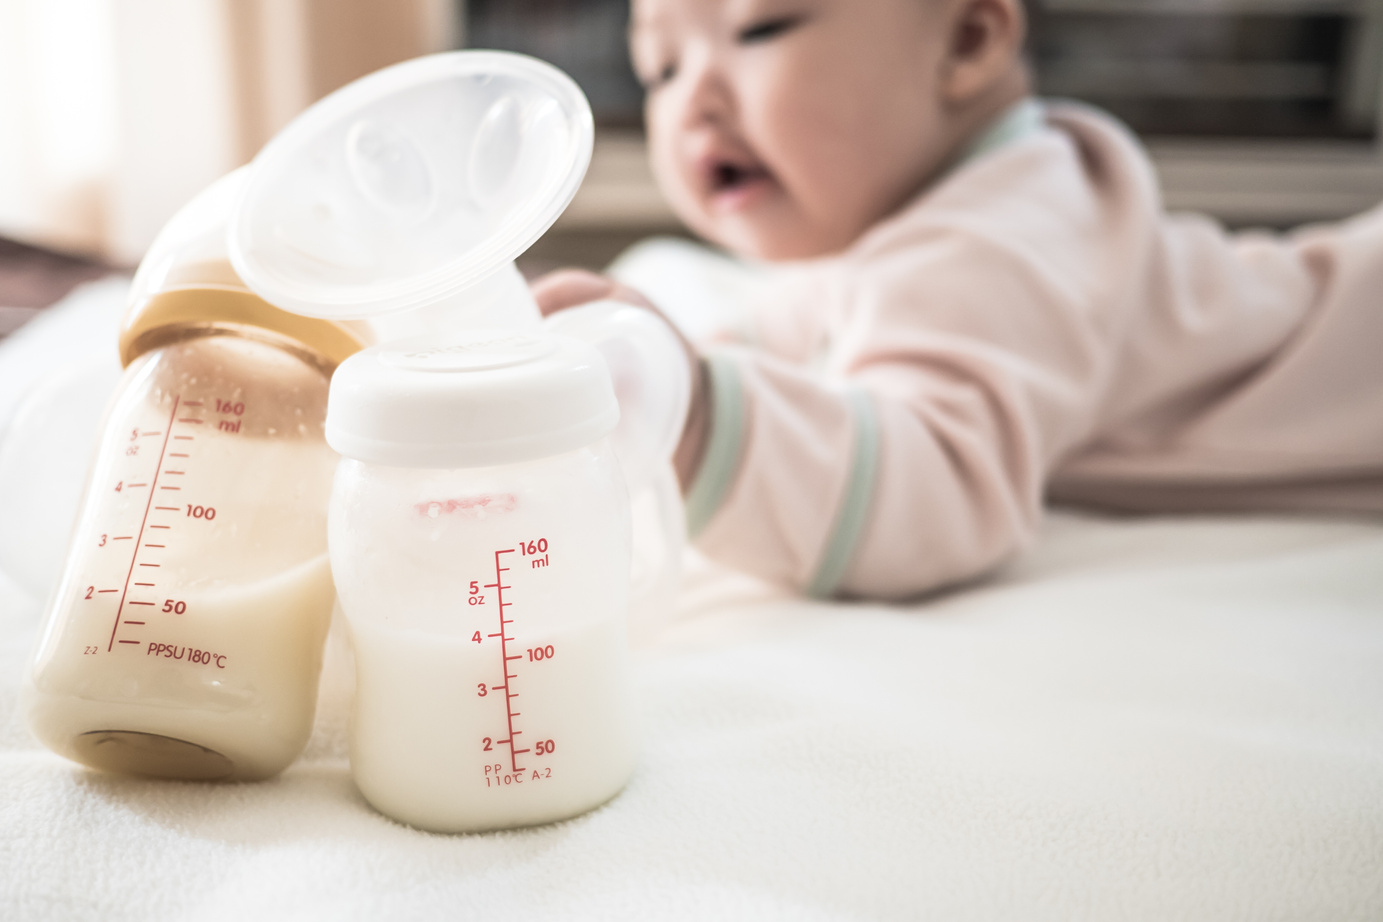 Baby Touching the Milk Bottle and Breast Pump